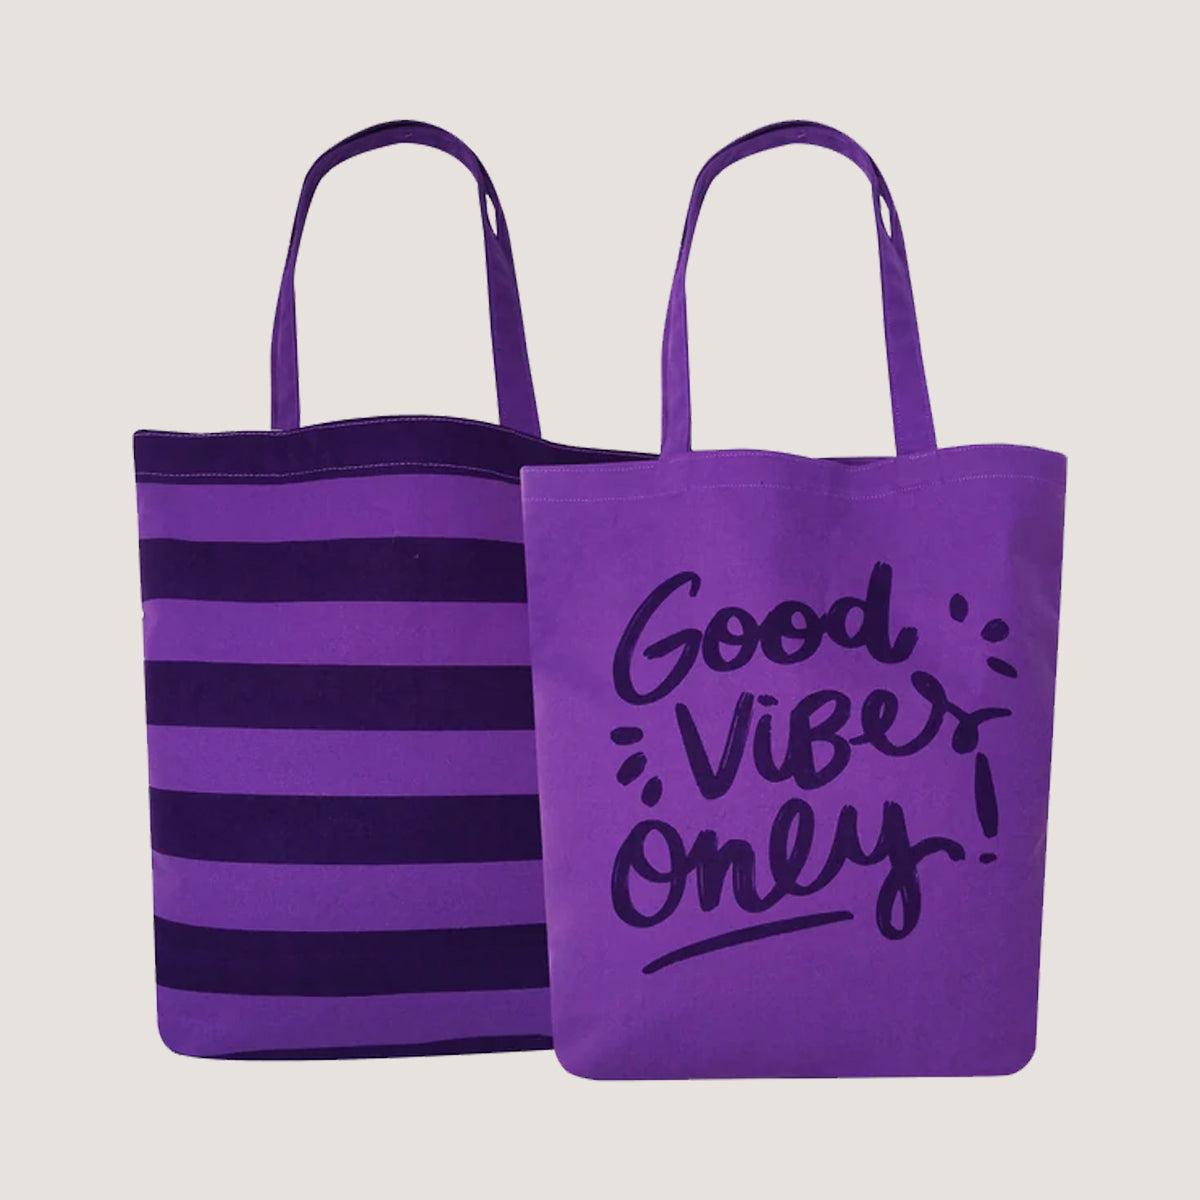 EARTHBAGS CANVAS TOTE BAG IN VIOLET - PACK OF 2